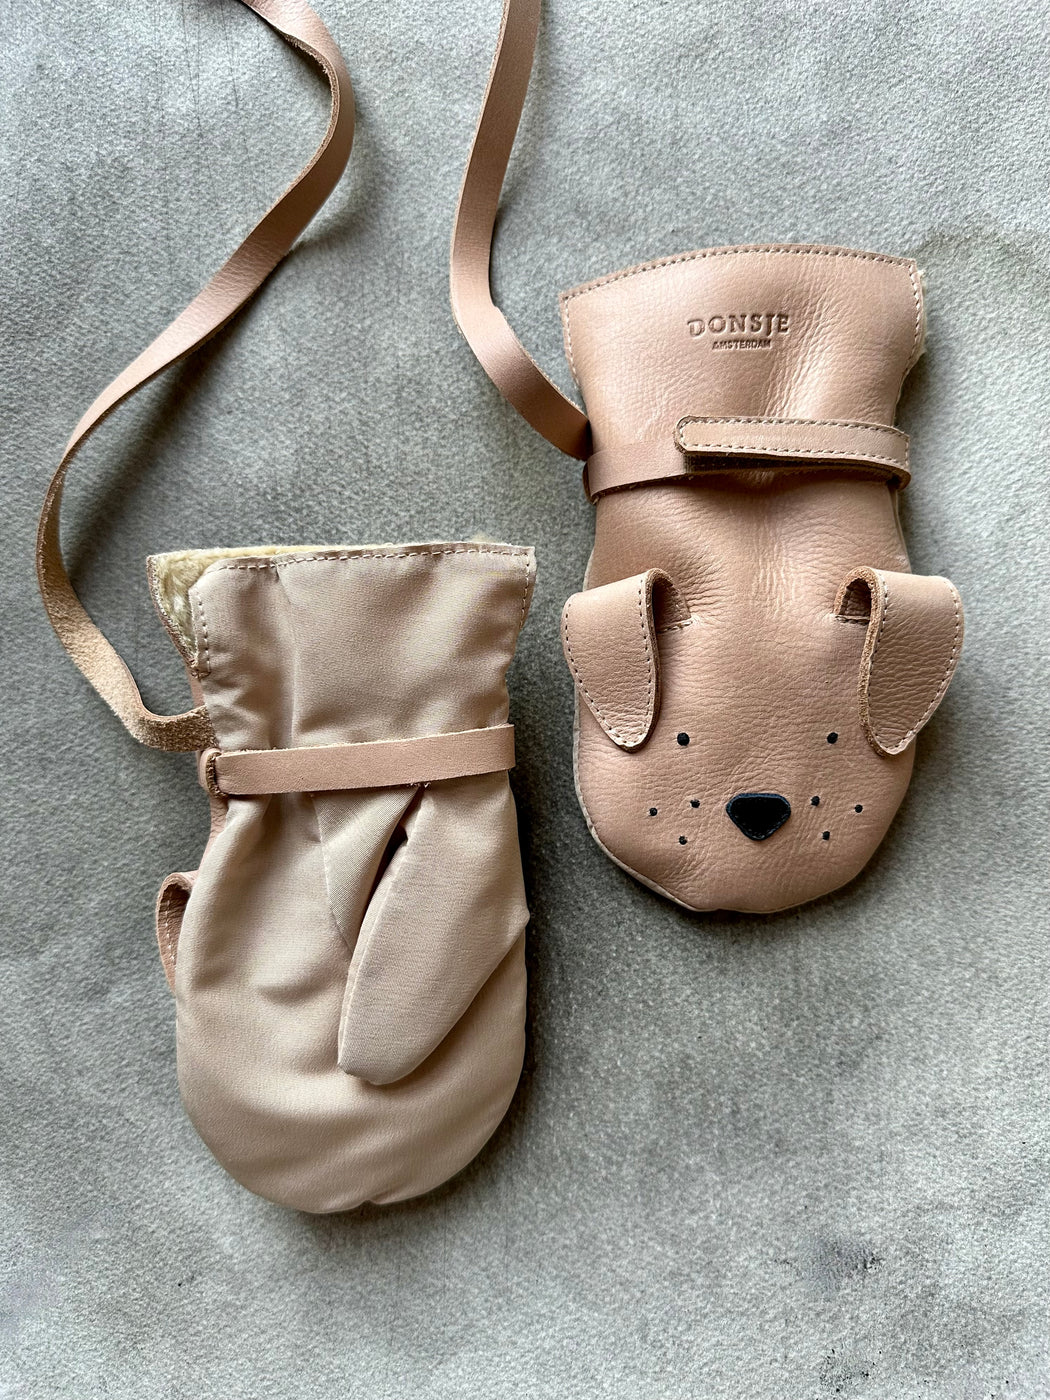 Donsje Leather "Doggy" Mittens:  3 - 4 years